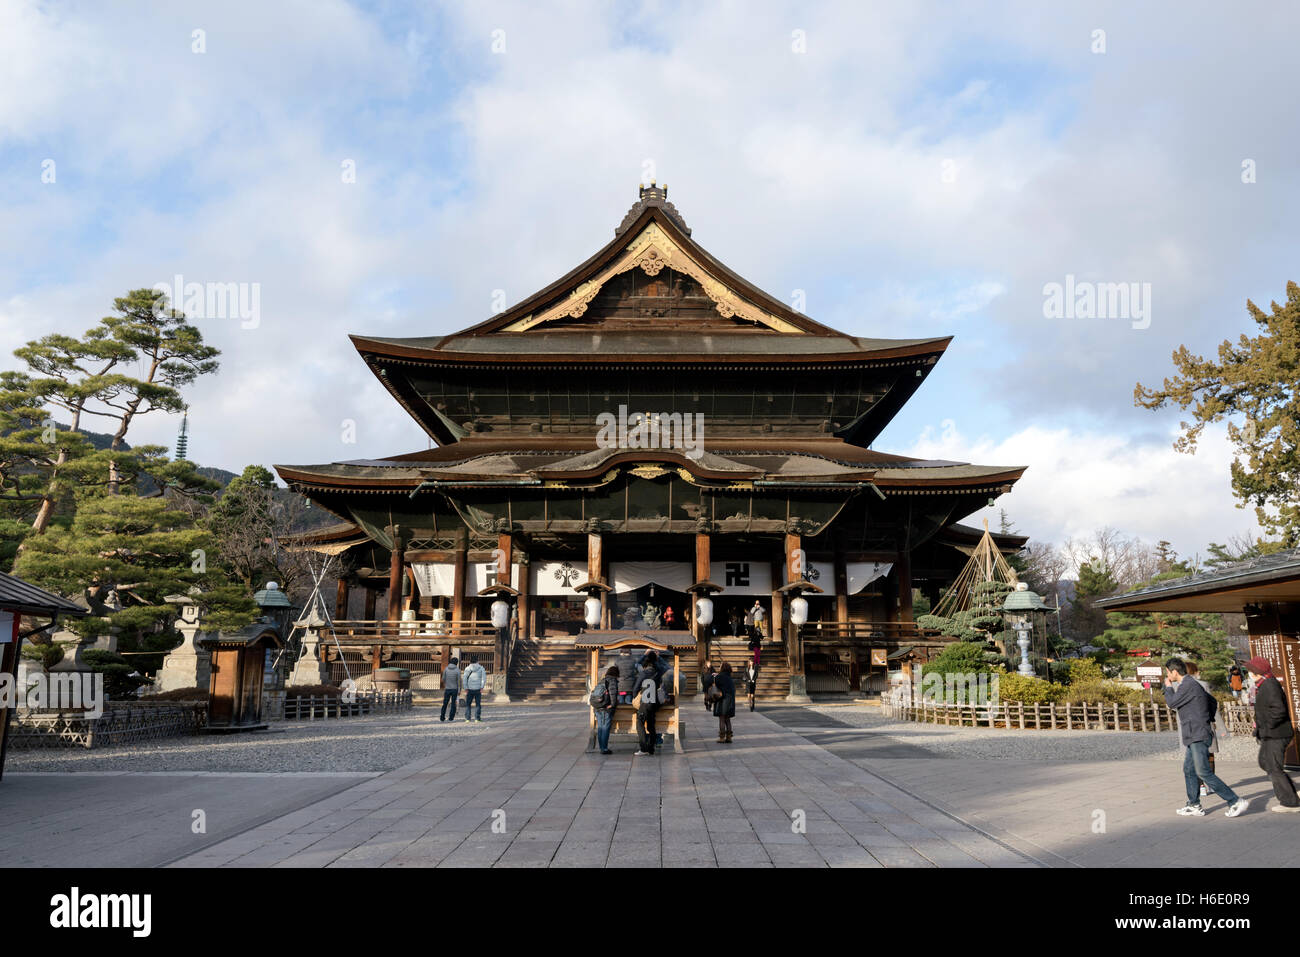 Nagano, Japan - December 27, 2015: Zenk0-ji is a Buddhist temple located in Nagano, Japan. T Stock Photo